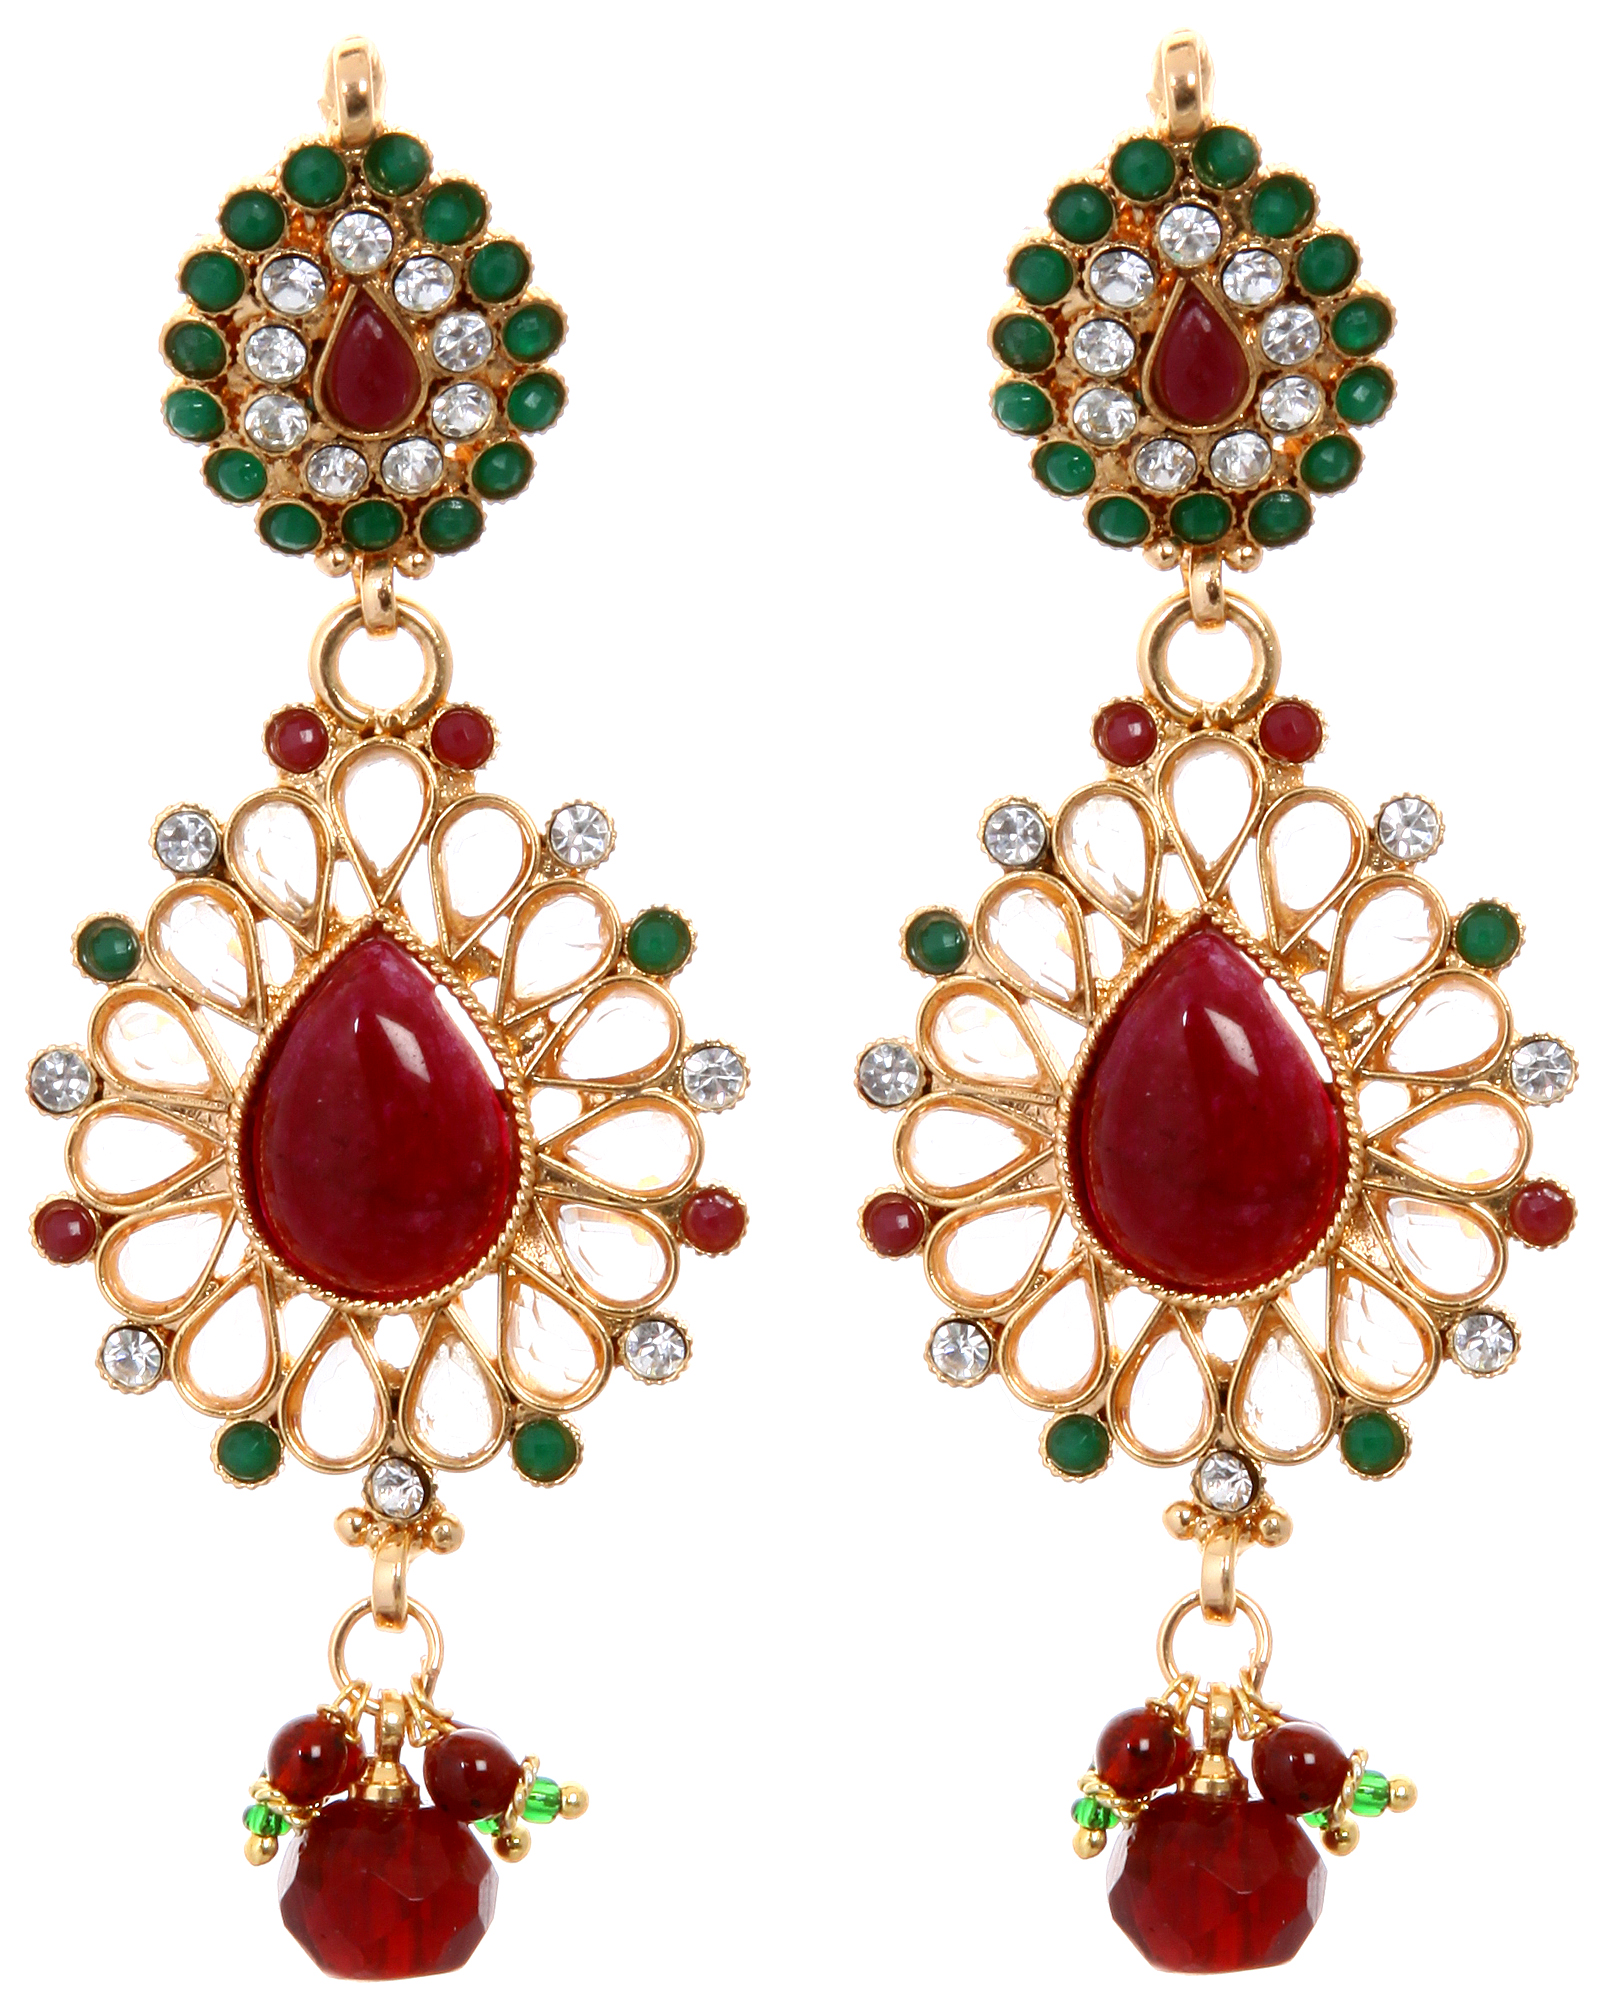 Faux Ruby and Emerald Earrings | Exotic India Art